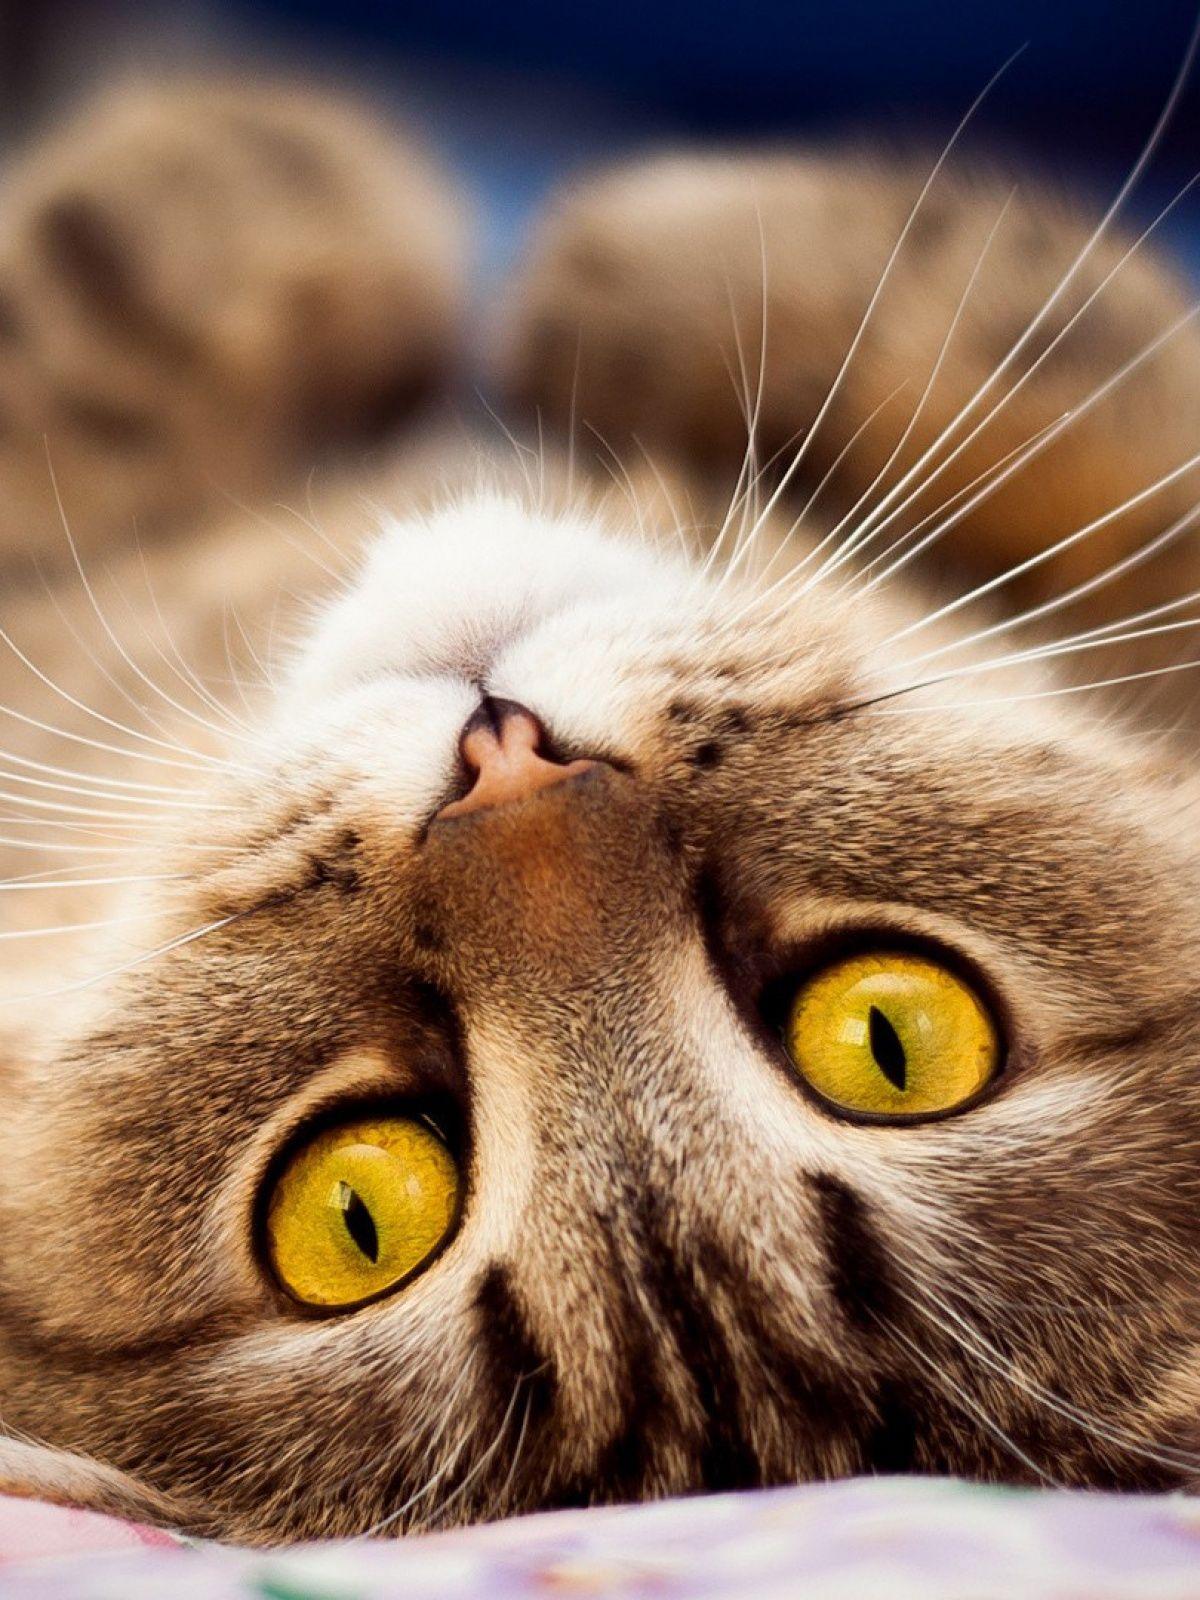 Upside Down Cat Amber Eyes Android Wallpaper free download